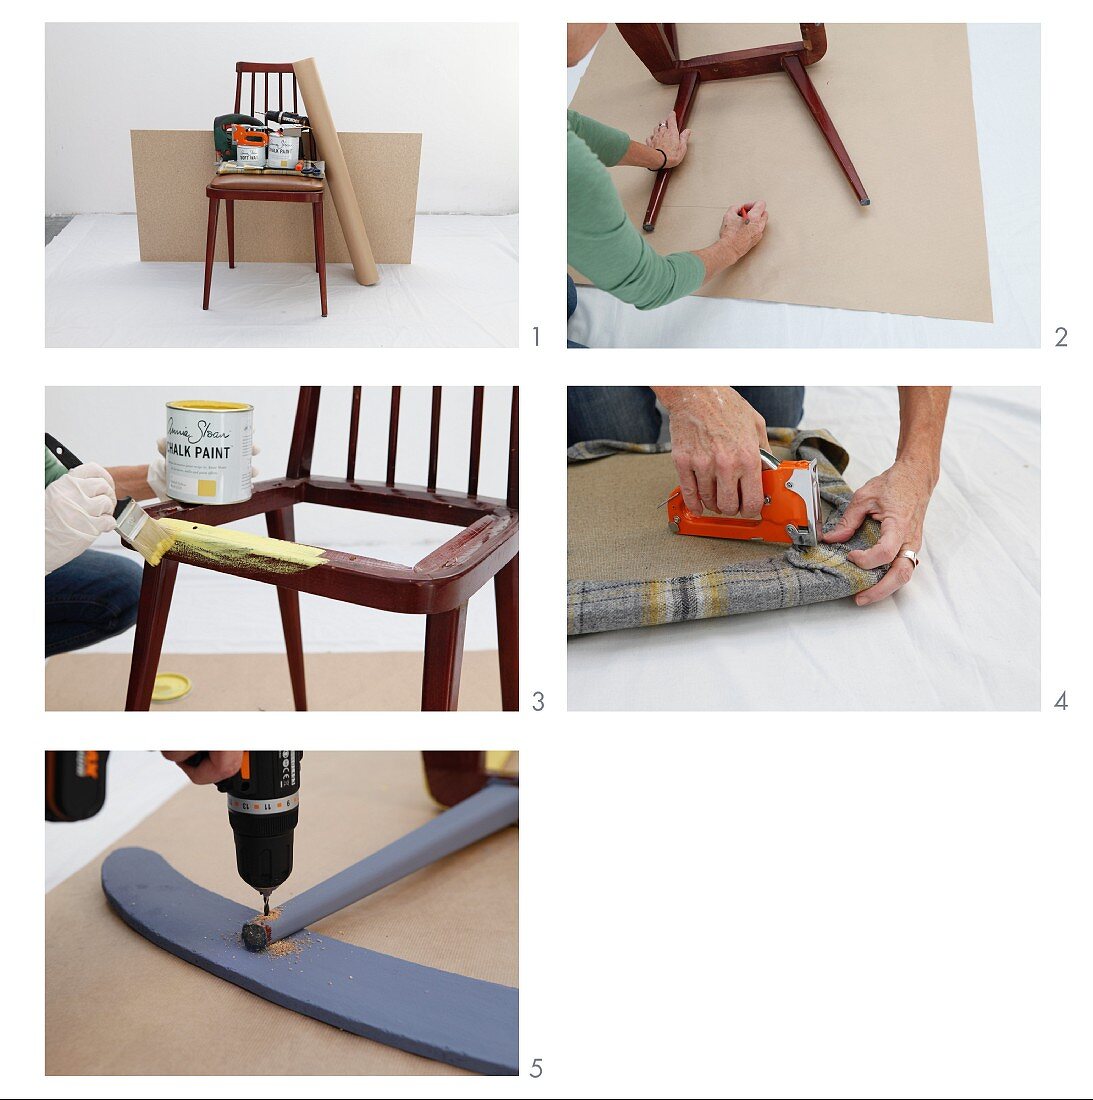 Instructions for converting a retro wooden chair into a rocking chair